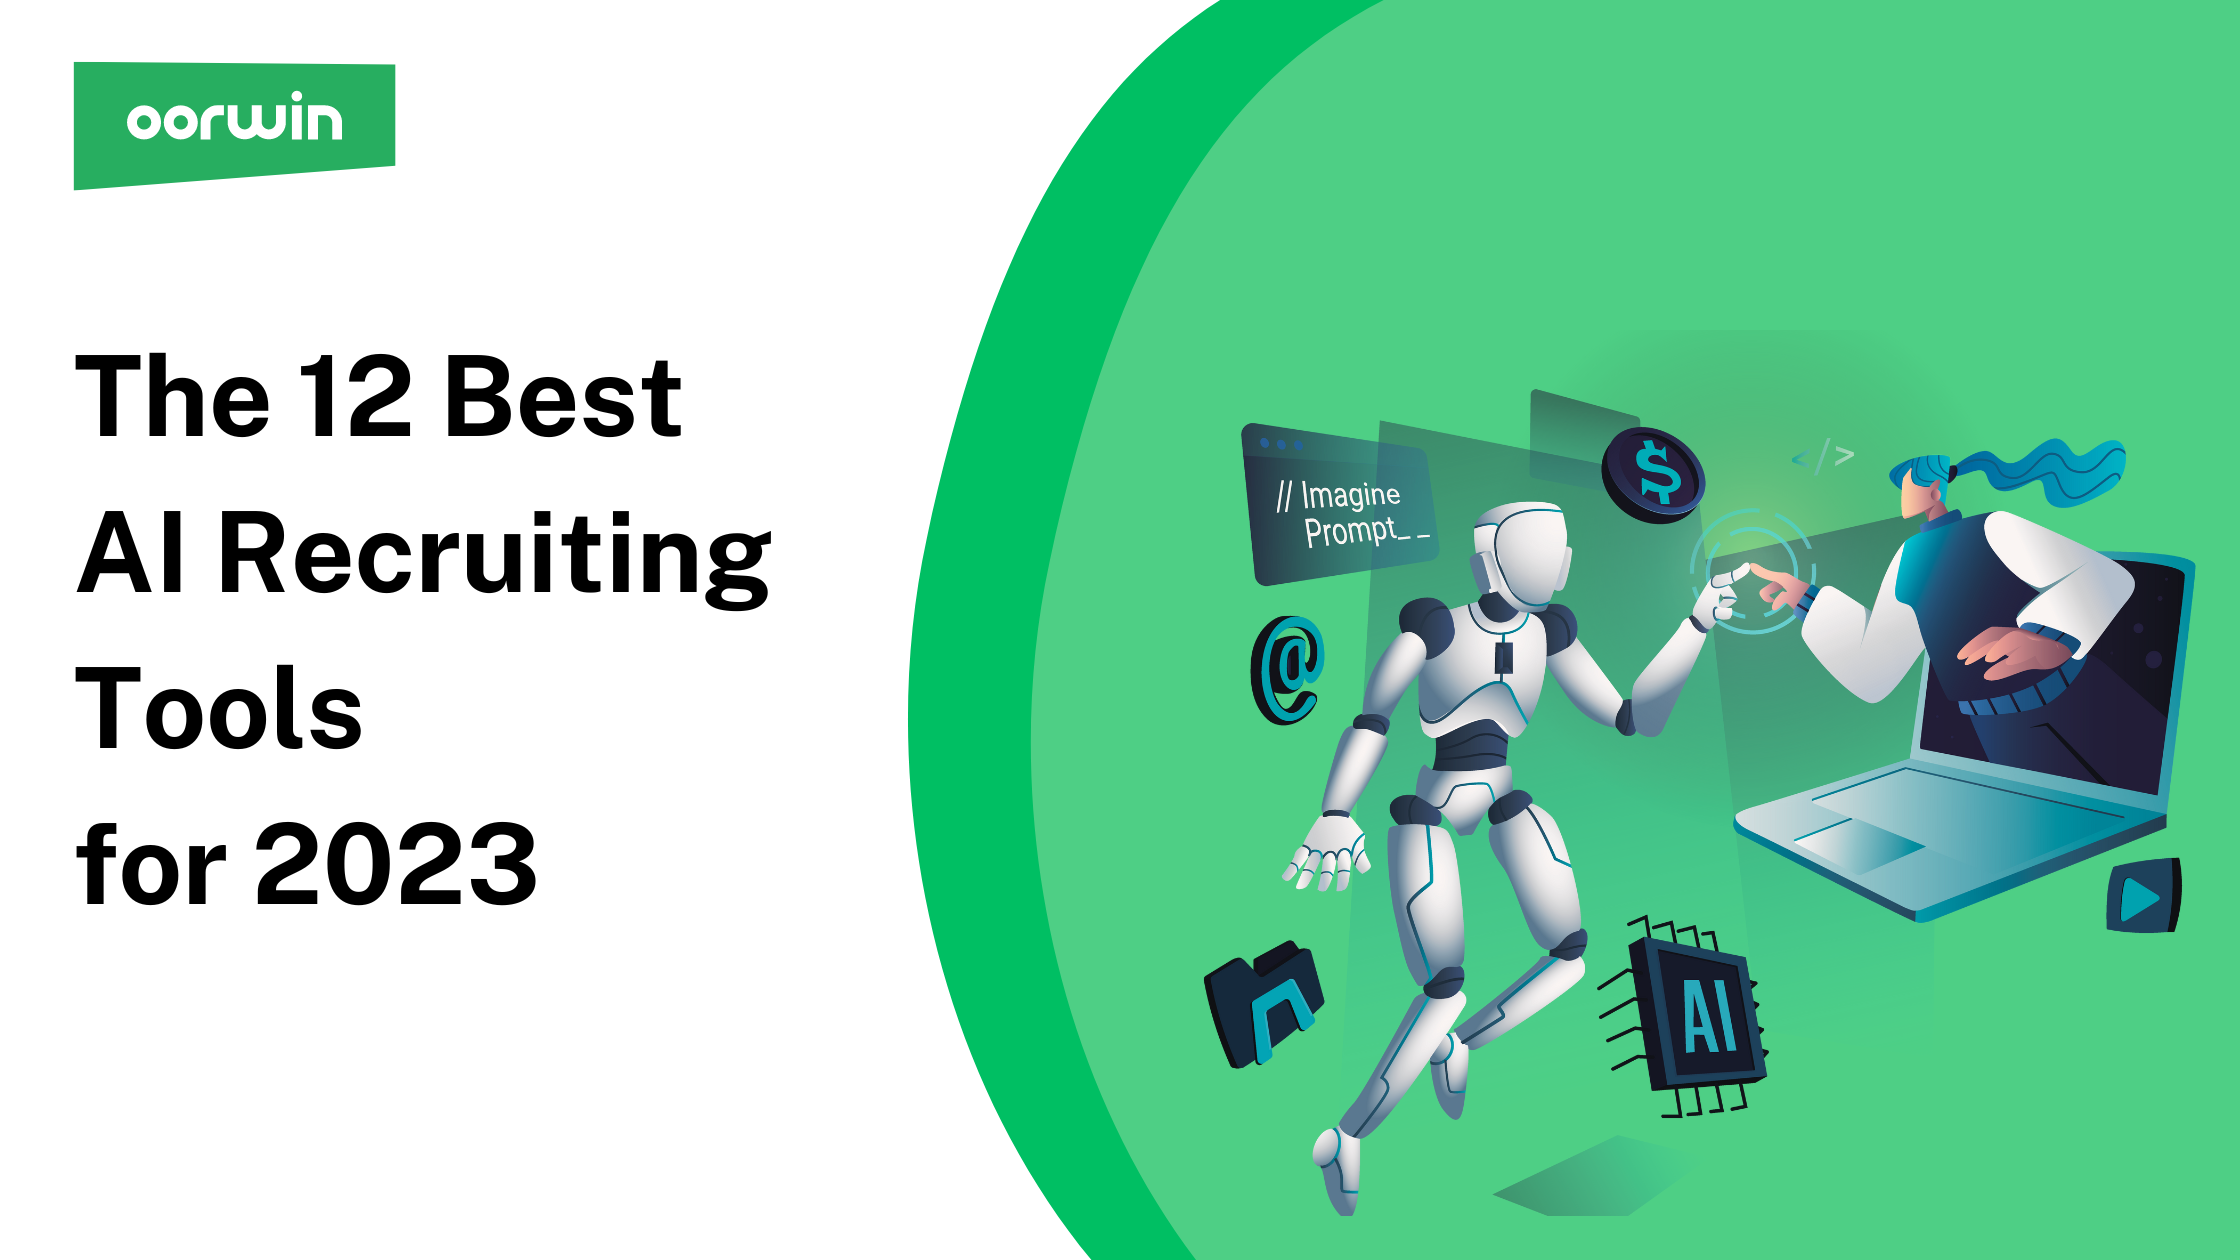 Top 12 AI Recruiting Tools for 2023